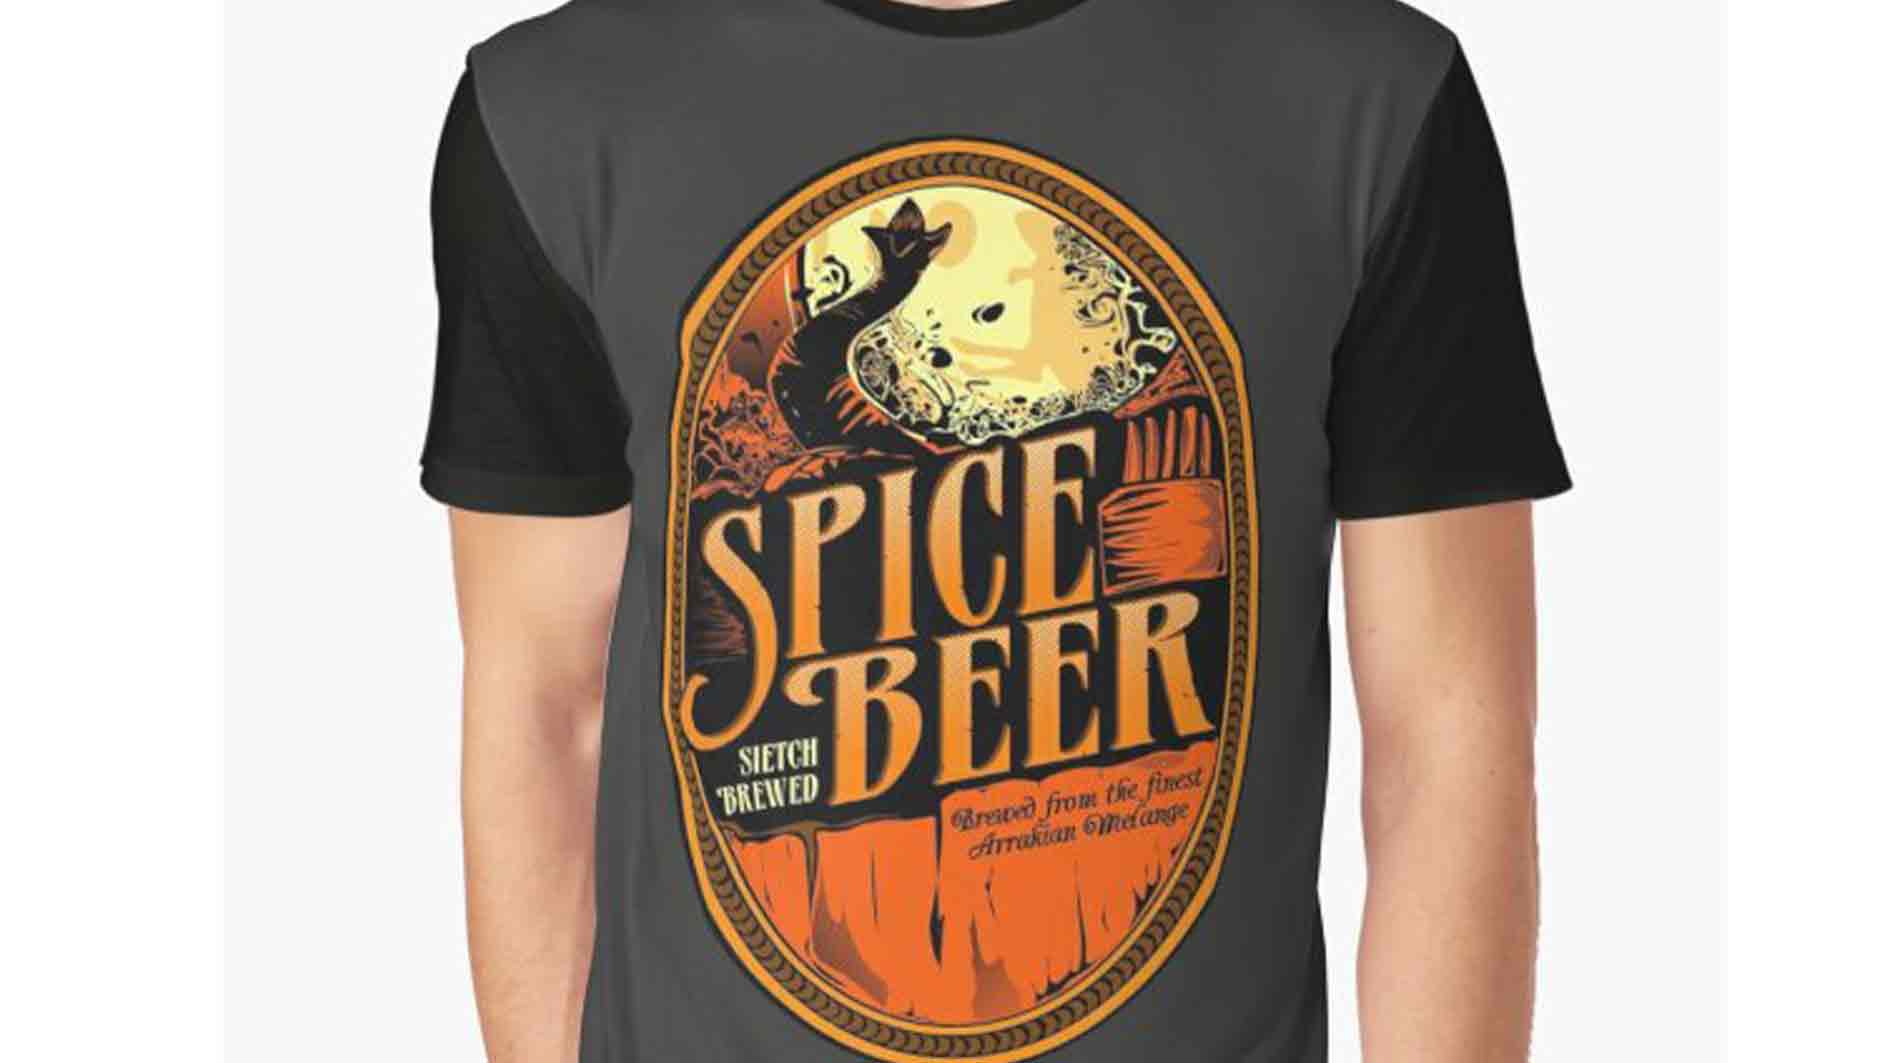 Spice Beer 1